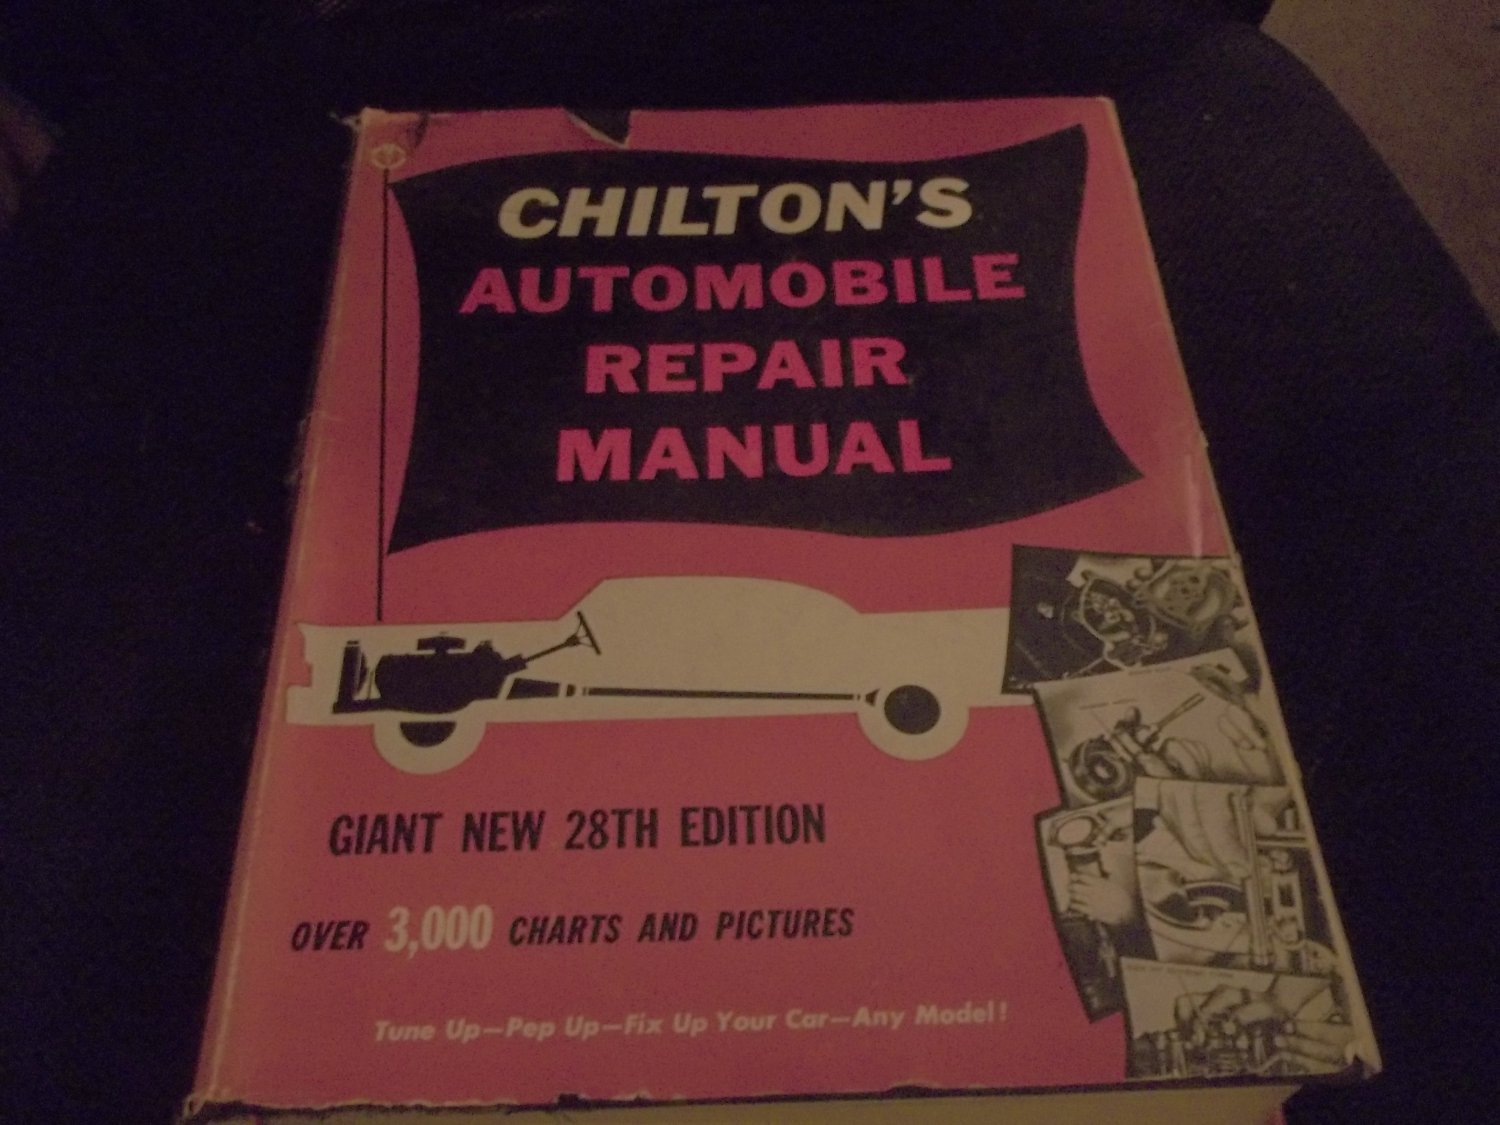 Chilton's Automobile Repair Manual, Dated 1957, 28th Edition